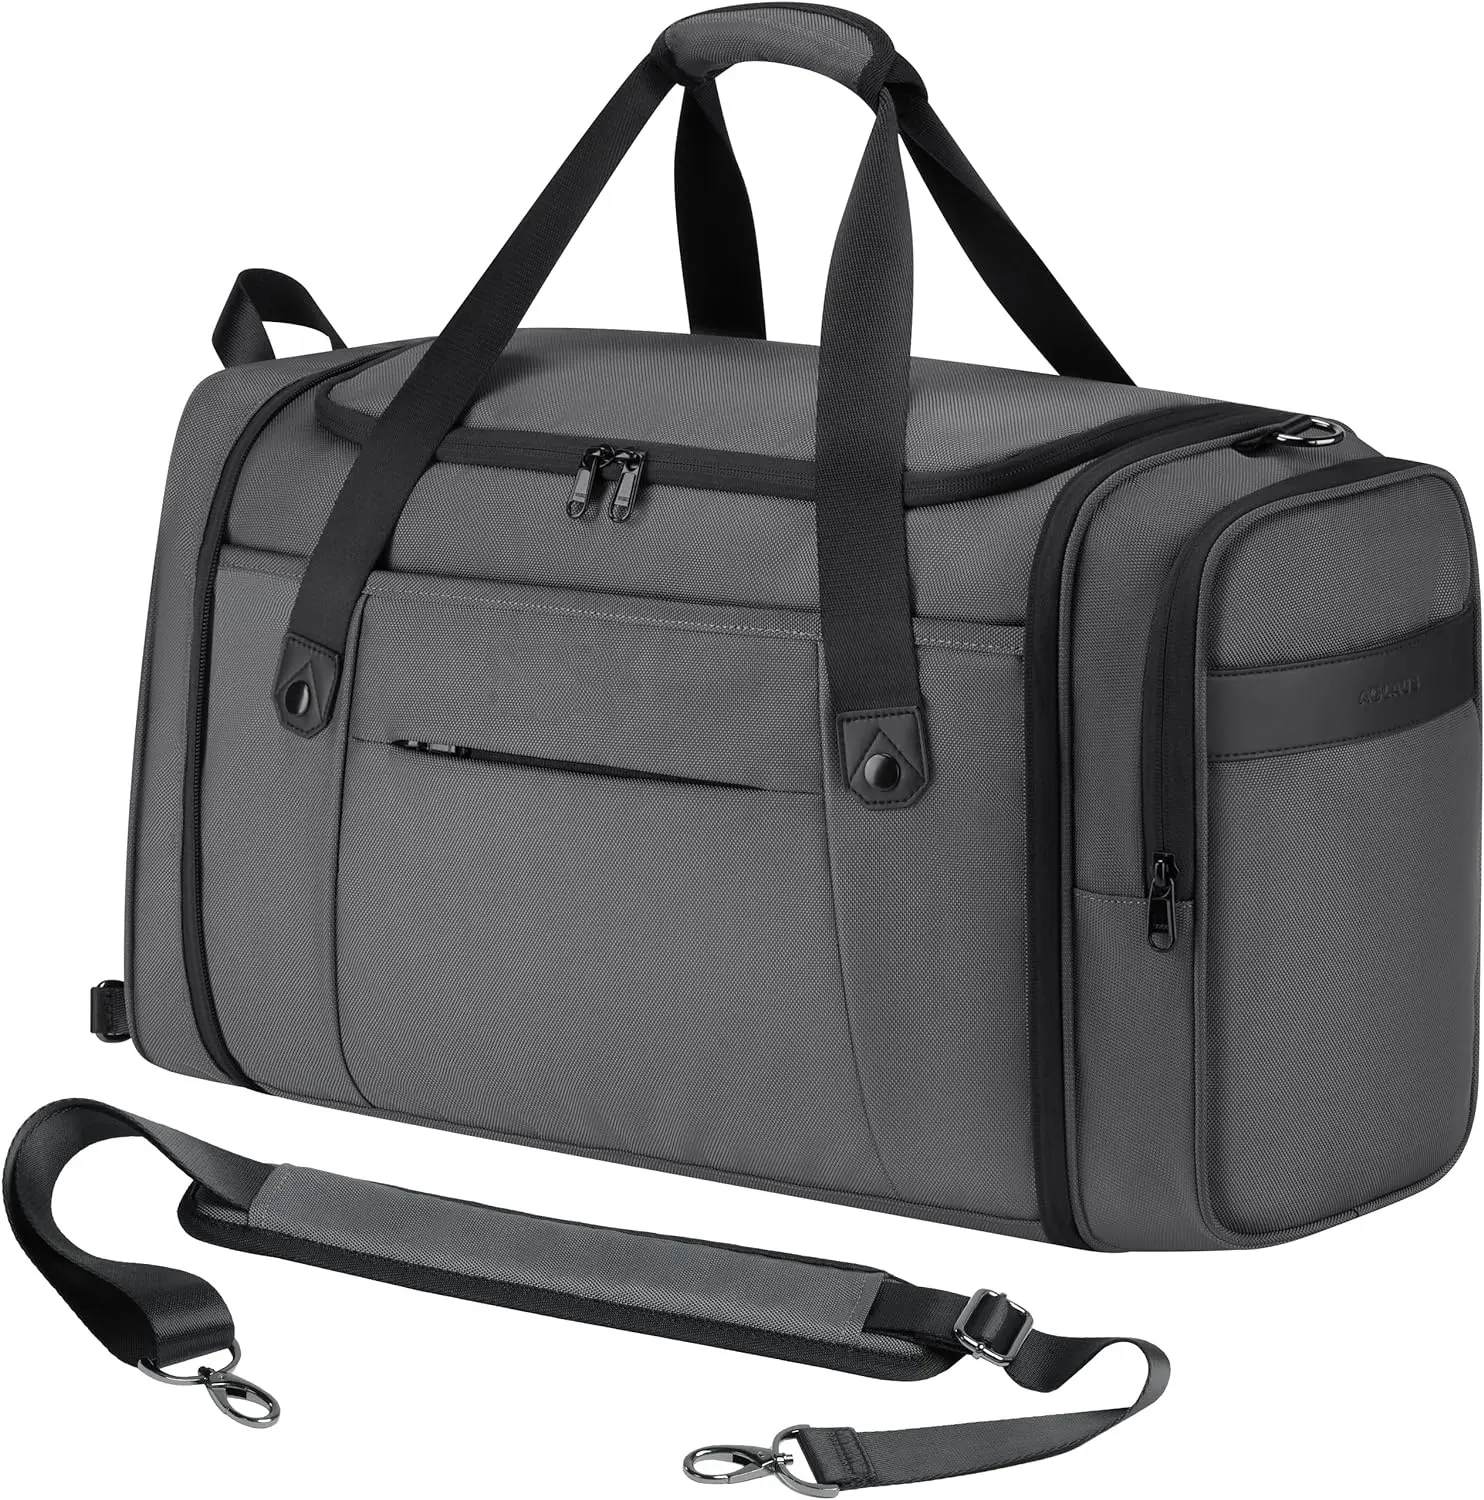 Travel Duffel Bag Foldable Weekender Sport Gym Duffel Bag Carry On Luggage Duffel Bag with shoe compartment